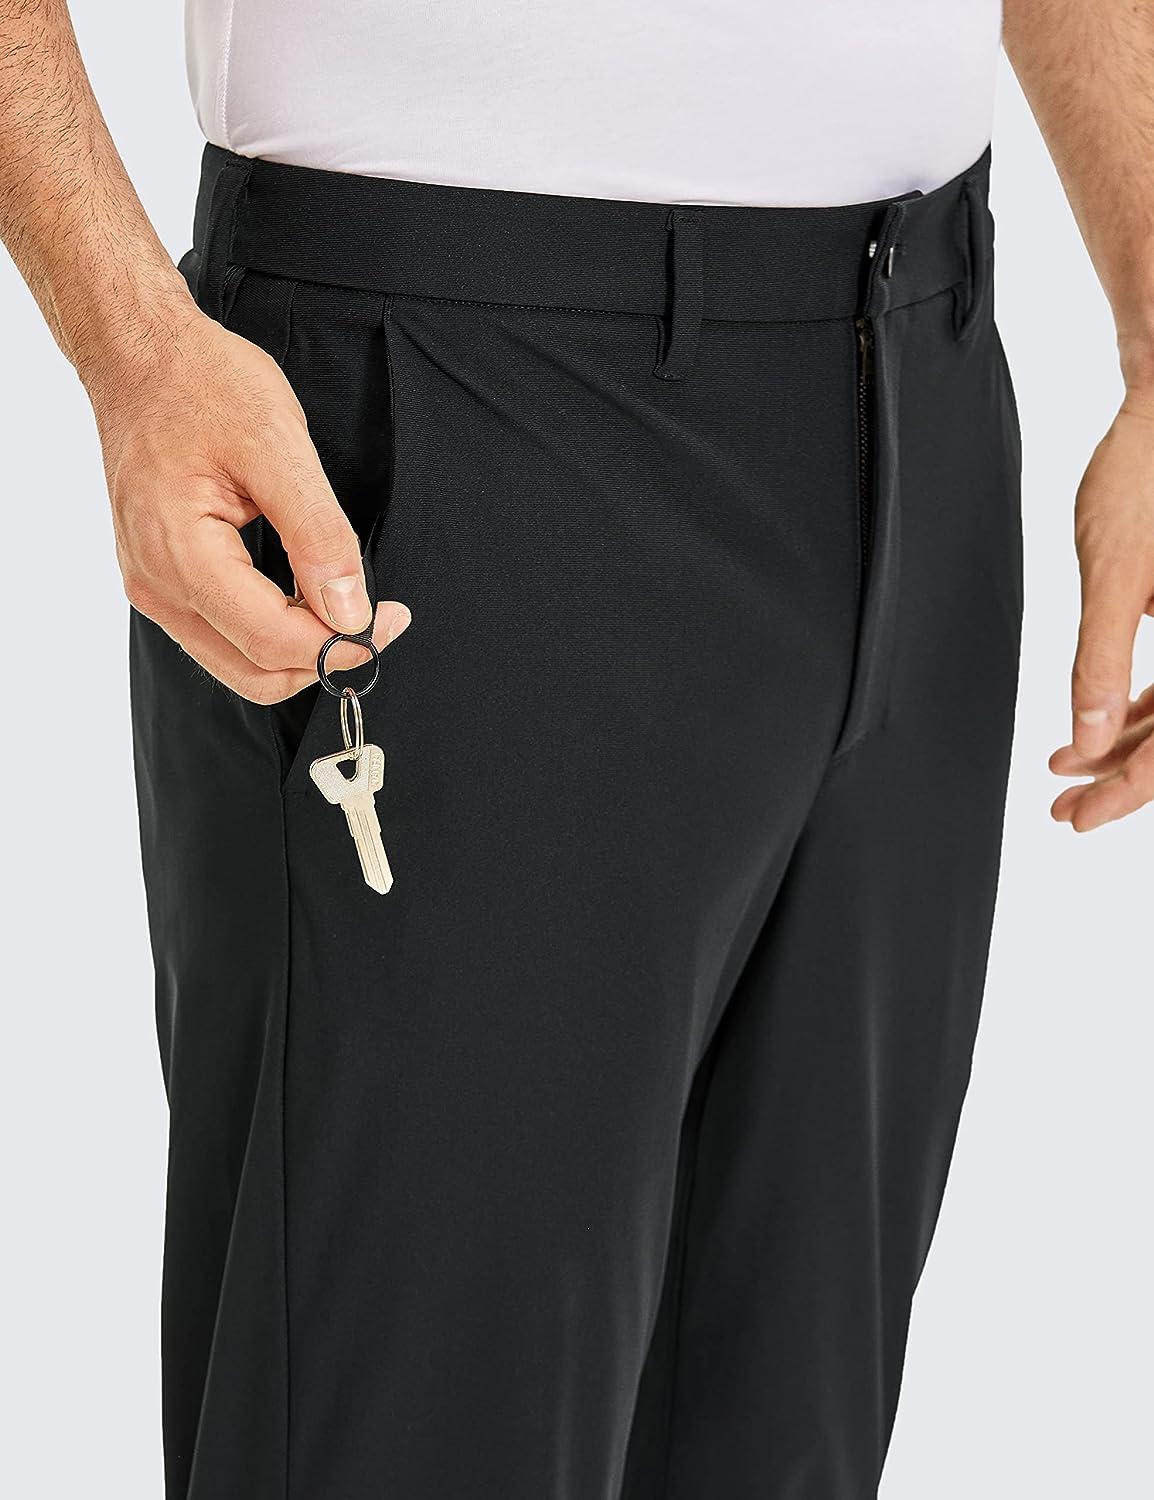  CRZ YOGA Mens All Day Comfy Golf Pants - 34 Quick Dry  Lightweight Work Casual Trousers